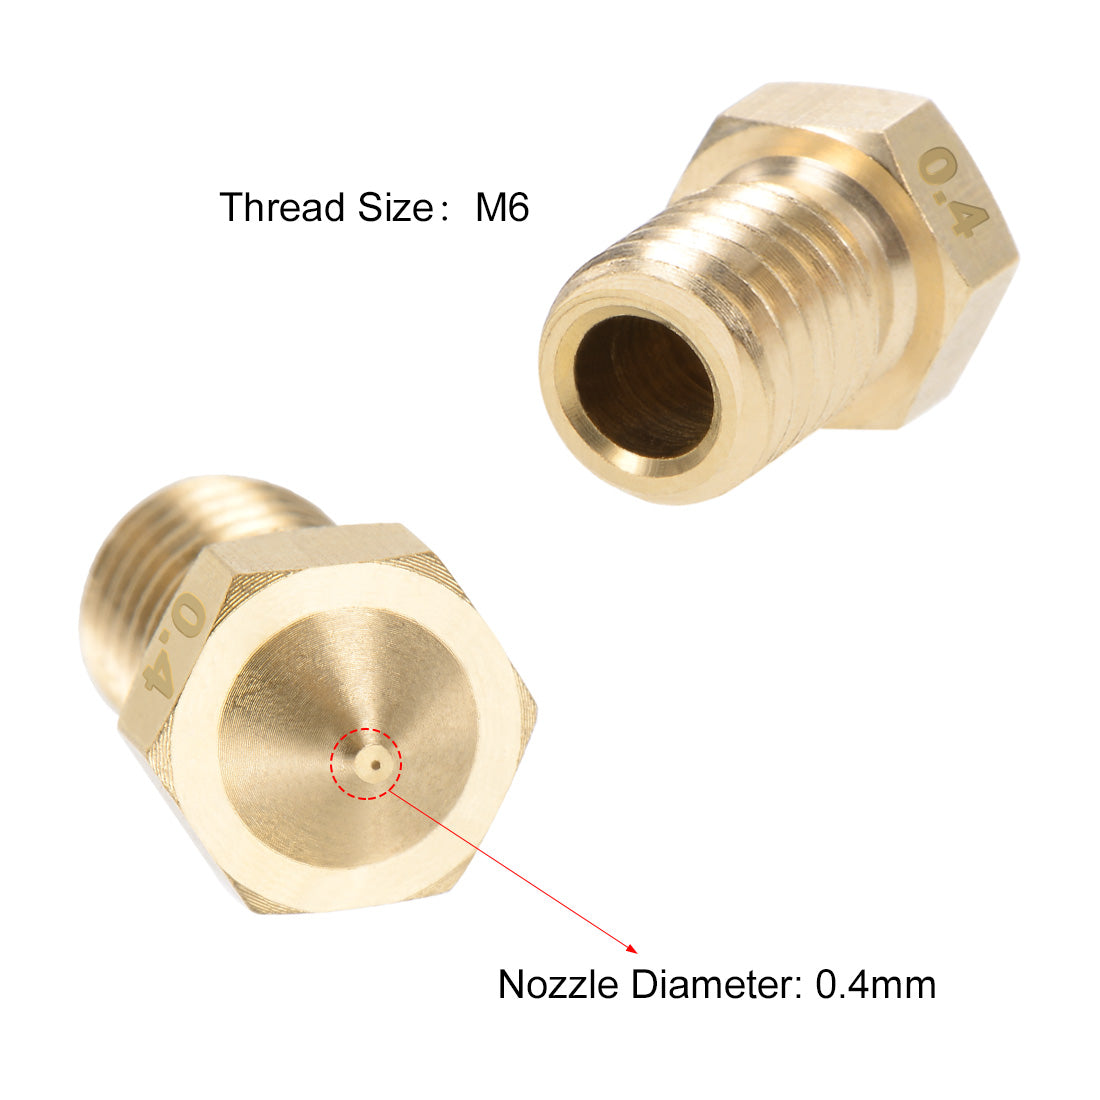 uxcell Uxcell 0.4mm 3D Printer Nozzle Head M6 for V5 V6 3mm Extruder Print, Brass 4pcs